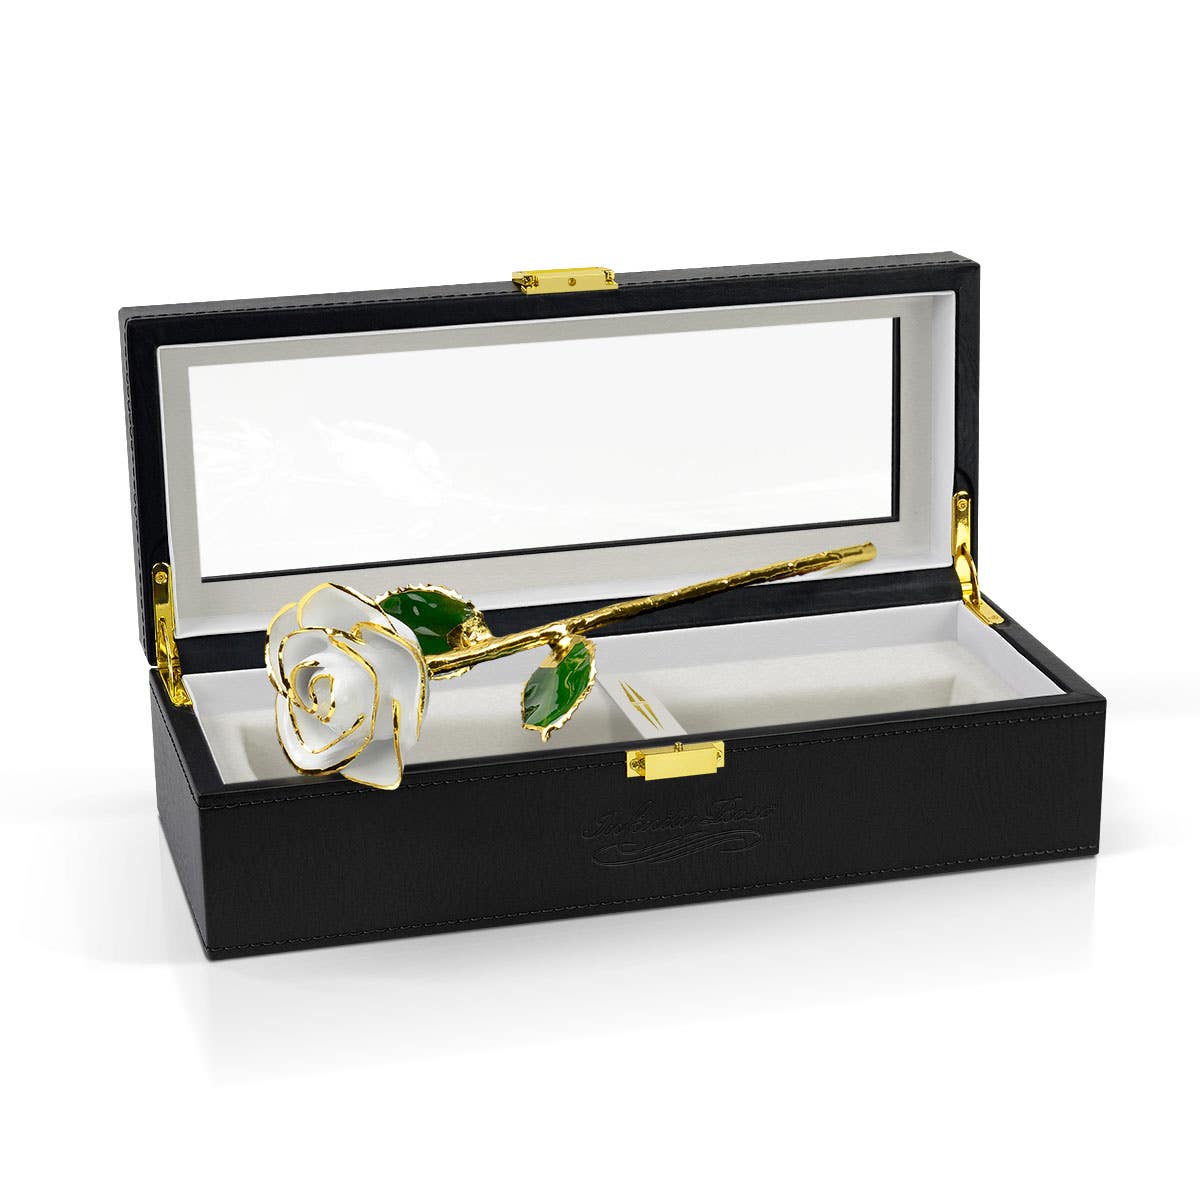 White Infinity Rose with Premium Glass Lid Display Case